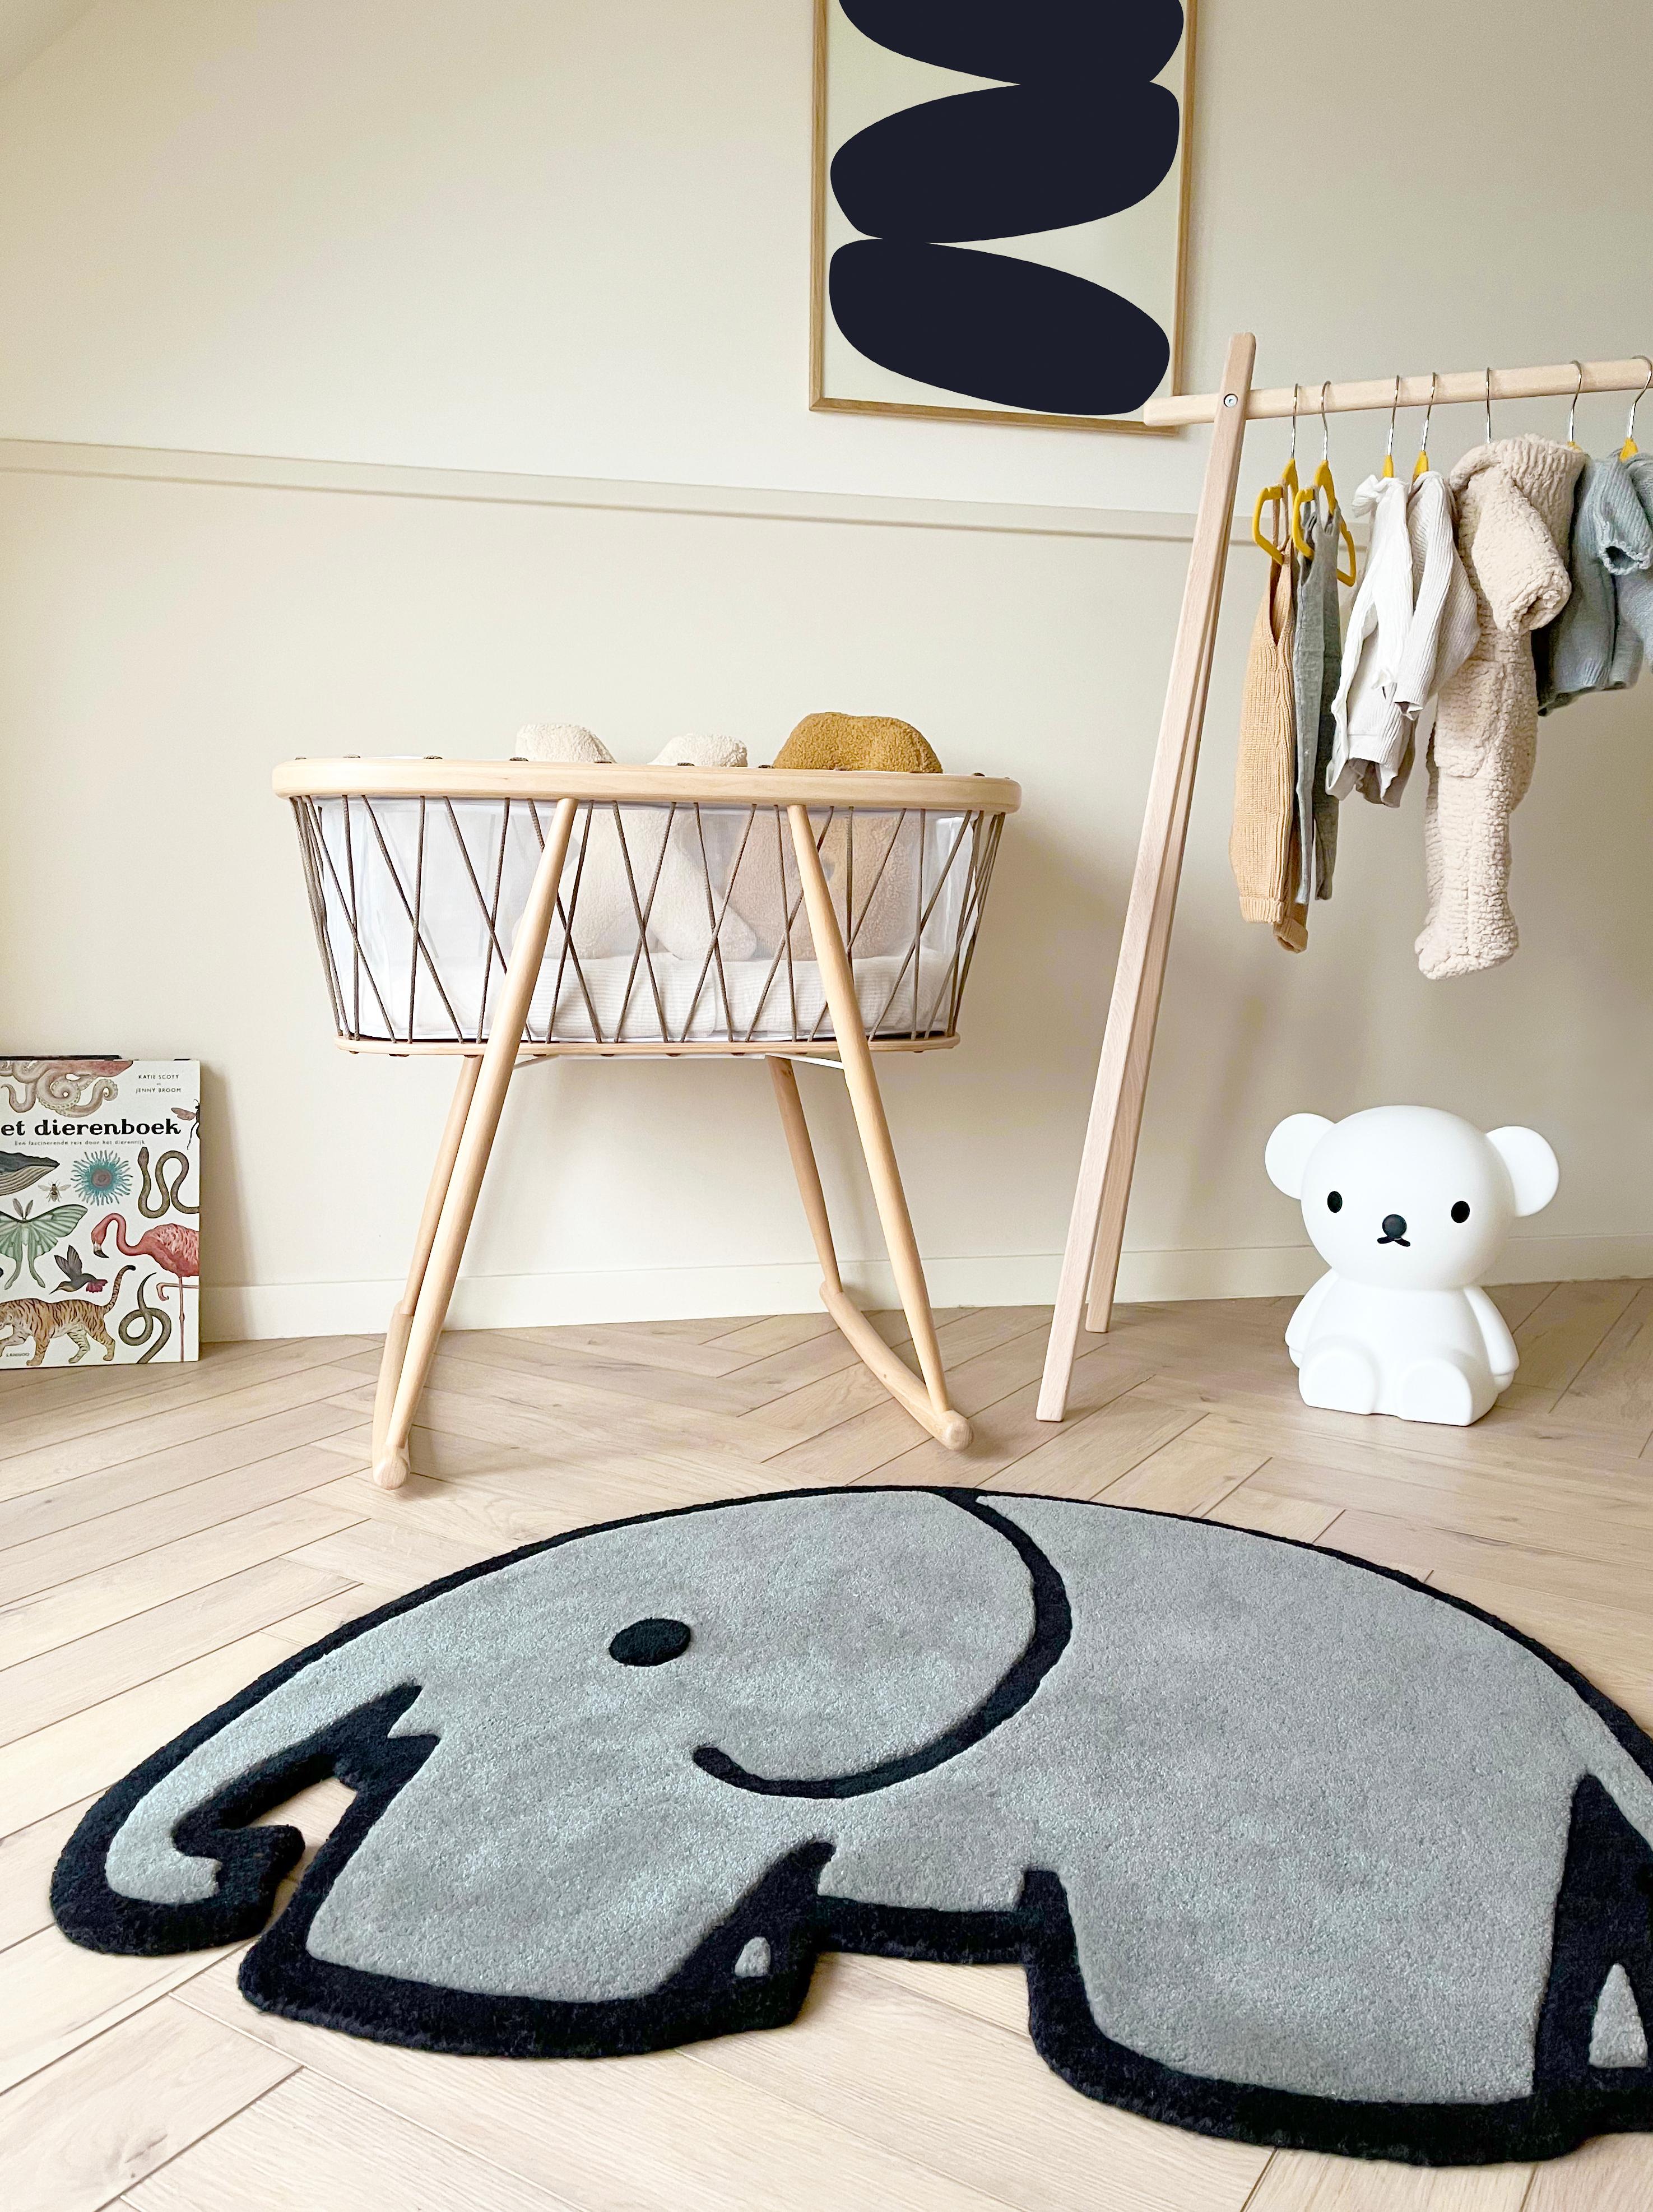 Shape your nursery room with the elephant rug from the miffy rug collection. This cute, not so little friend, adds a playful and sophisticated vibe into the kids room. The rug is made in a beautiful grey tone and features different pile heights for